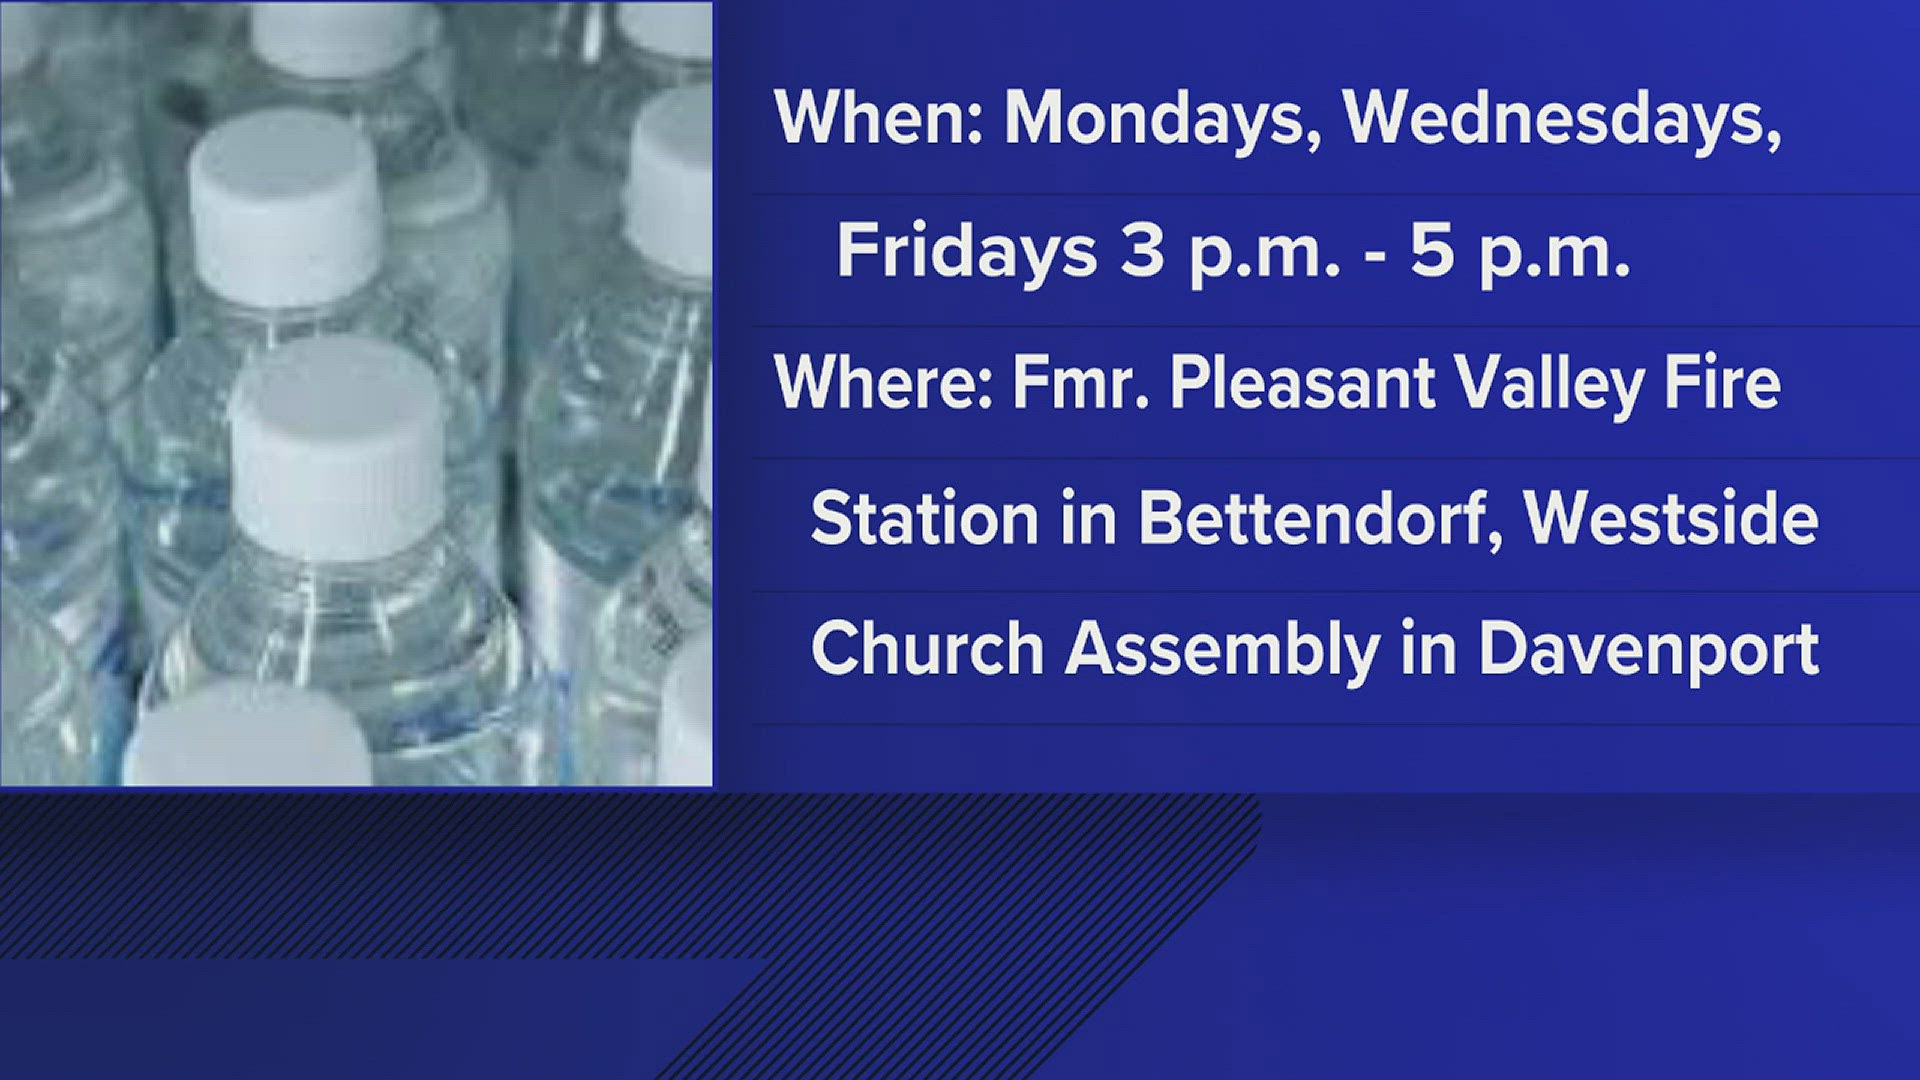 Residents will be able to pick up clean drinking water on Mondays, Wednesdays and Fridays from 3 p.m. to 5 p.m. until July 26.